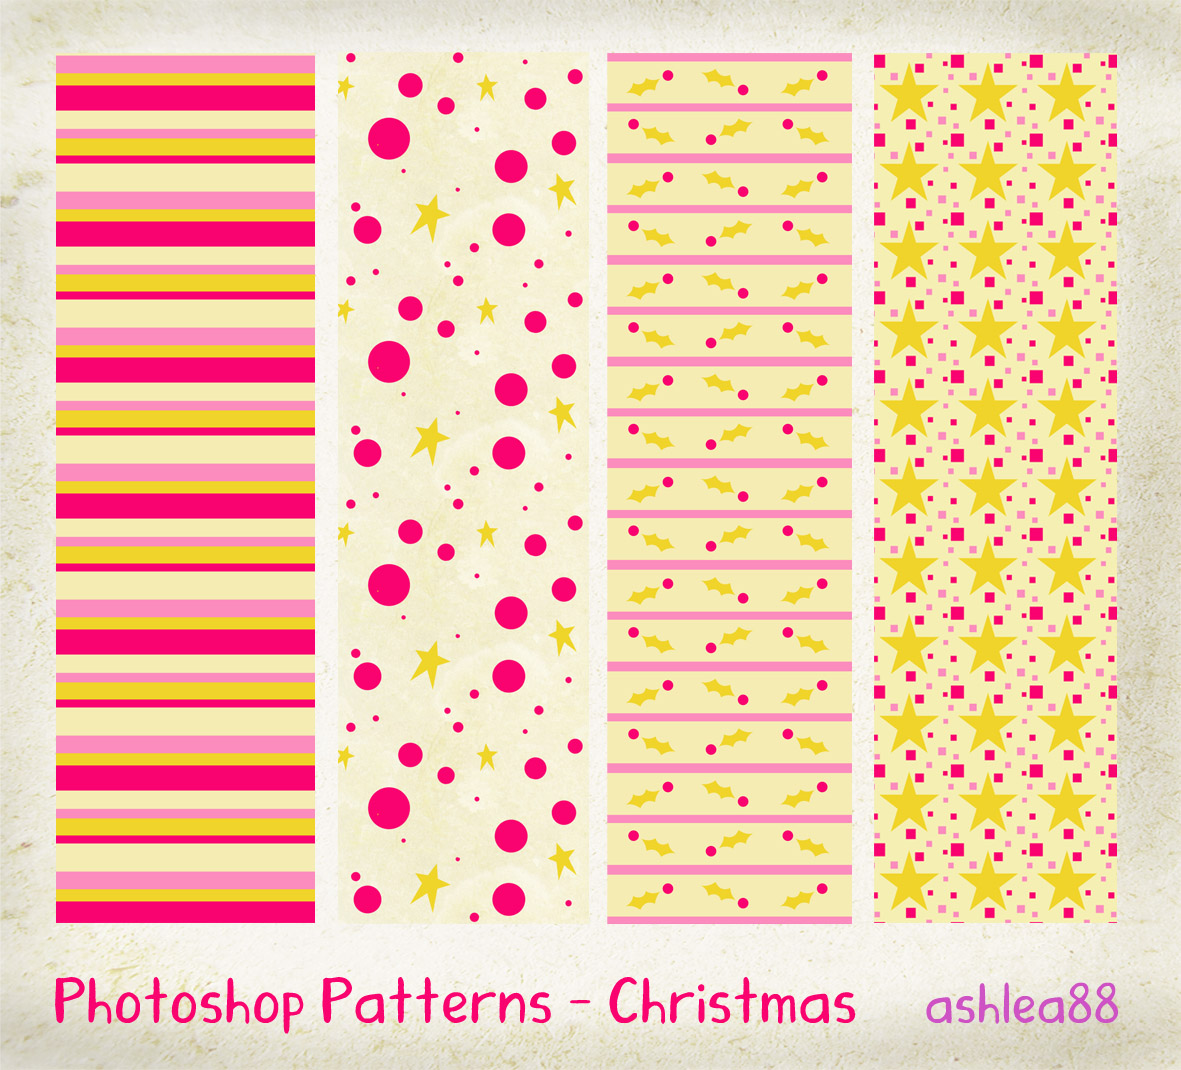 PS Patterns - Christmas